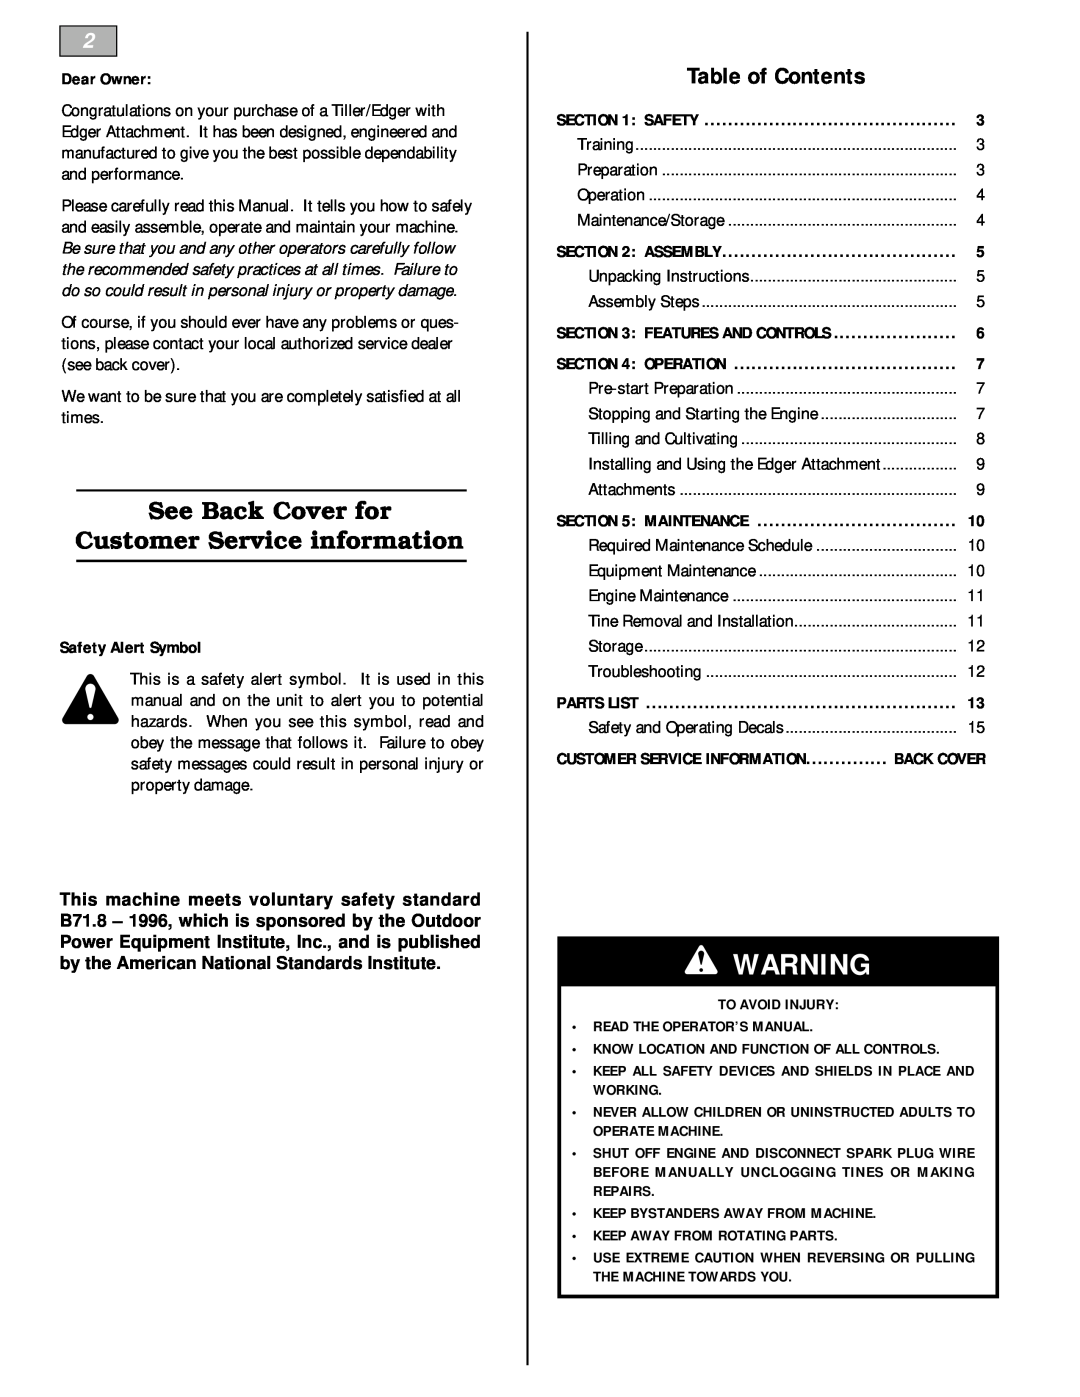 Bolens 12228 owner manual See Back Cover for Customer Service information, Table of Contents 